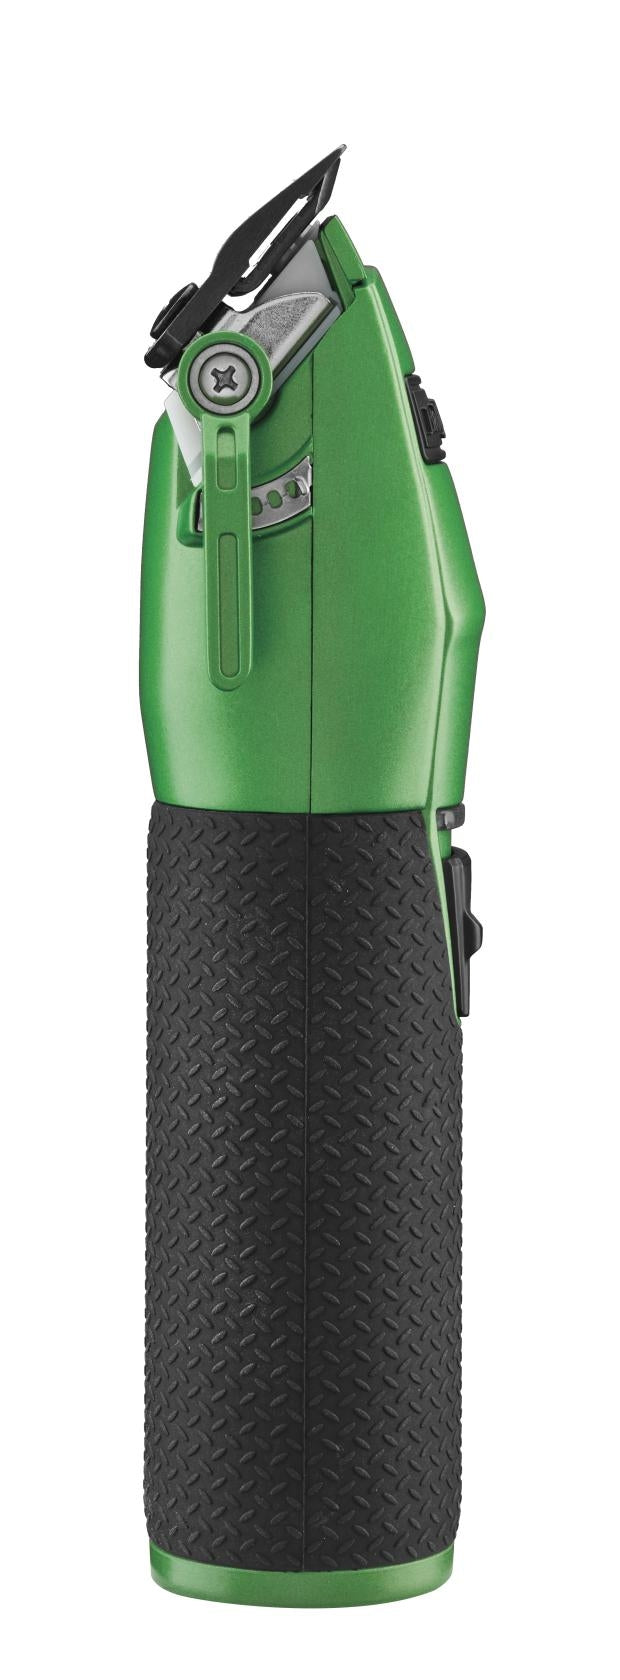 BaByliss PRO Boost FX Green Cordless Clipper - Limited Edition Influencer Collection - Patty Cuts (FX870GI) - [PRE-ORDER]